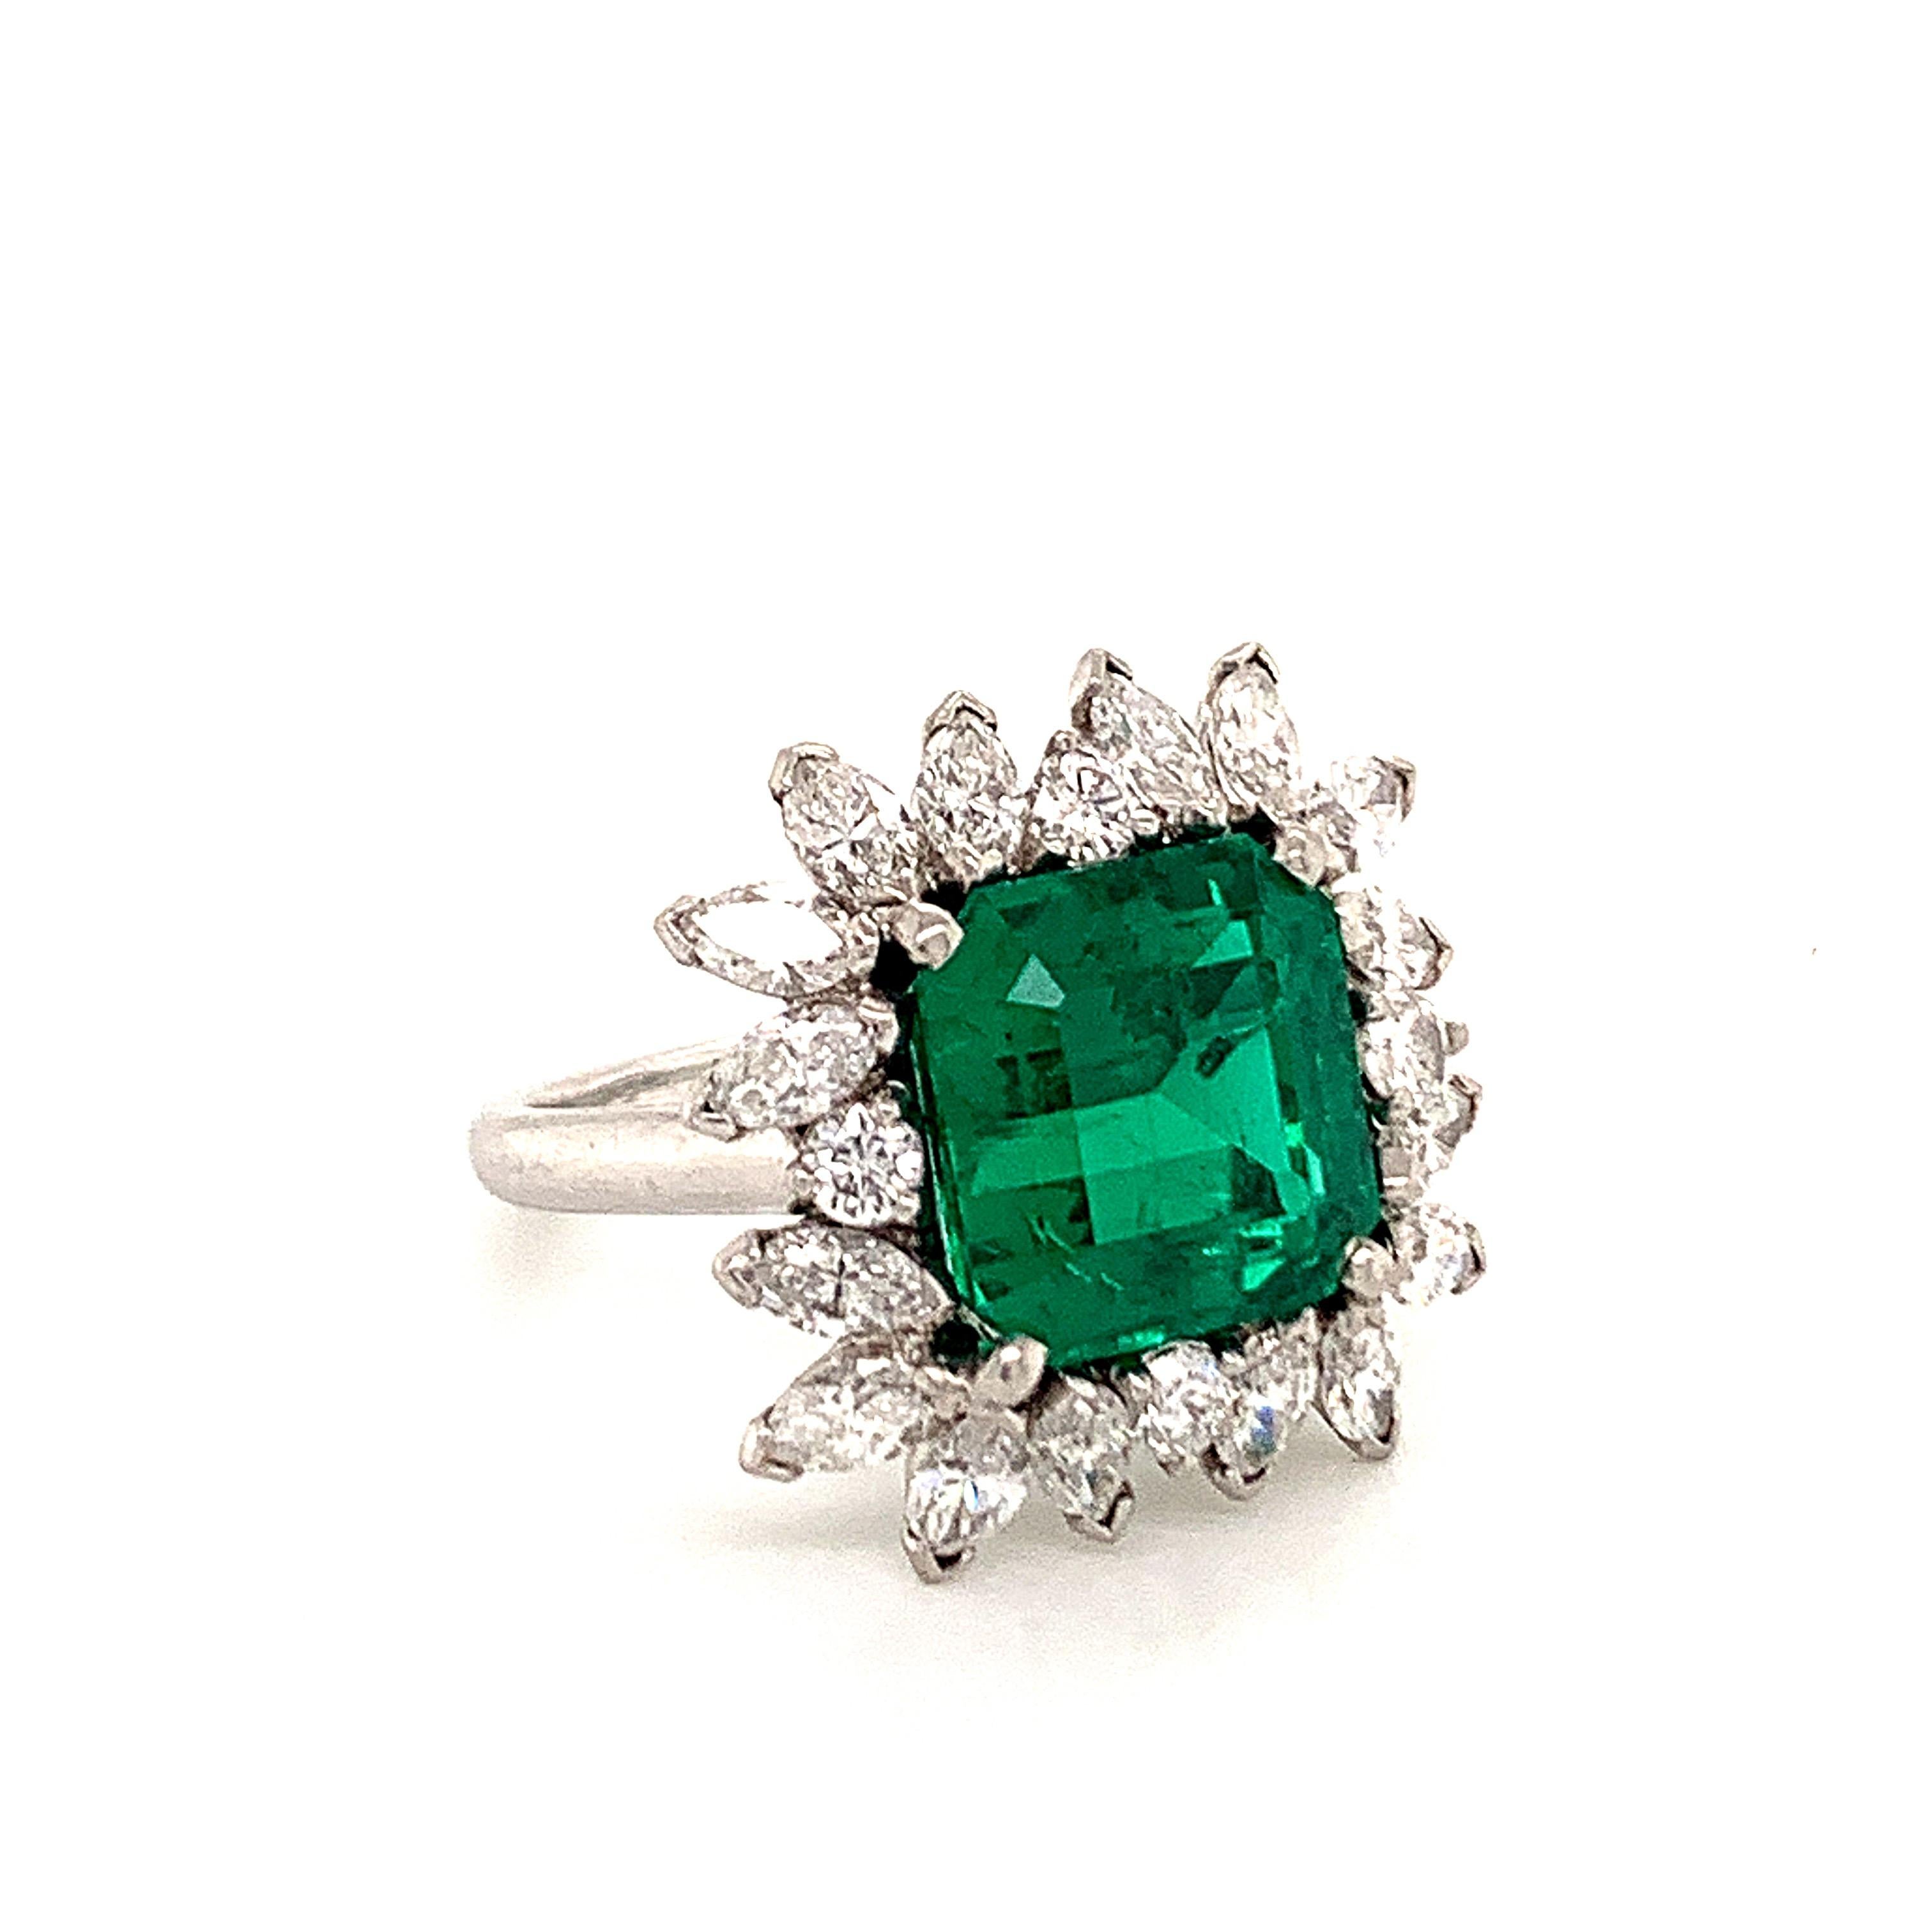 An exquisite AGL certified 5.05 carat Colombian emerald is the glowing star of this fanciful ring. Graded with insignificant oil treatment, the vividly clean emerald is surrounded by 16 marquise cut diamonds and 4 round brilliant diamonds that weigh